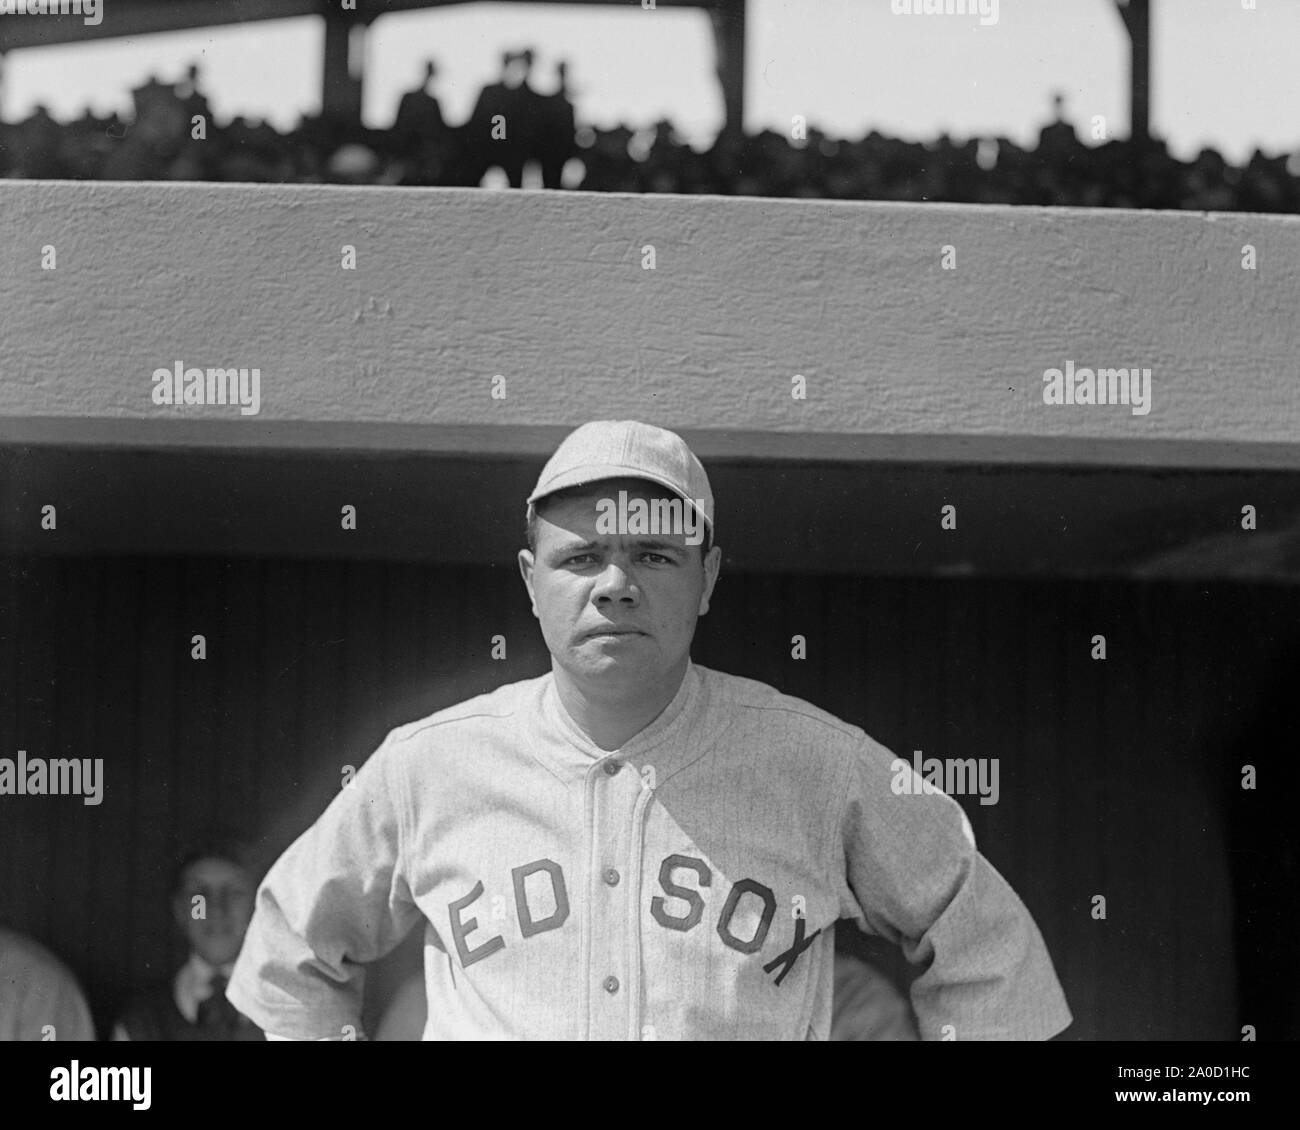 George Herman 'Babe' Ruth Jr. (February 6, 1895 – August 16, 1948) was an American professional baseball player whose career in Major League Baseball (MLB) spanned 22 seasons, from 1914 through 1935. Nicknamed 'The Bambino' and 'The Sultan of Swat', he began his MLB career as a star left-handed pitcher for the Boston Red Sox, but achieved his greatest fame as a slugging outfielder for the New York Yankees. Ruth established many MLB batting (and some pitching) records, including career home runs (714), runs batted in (RBIs) (2,213), bases on balls (2,062), slugging percentage (.690). Stock Photo